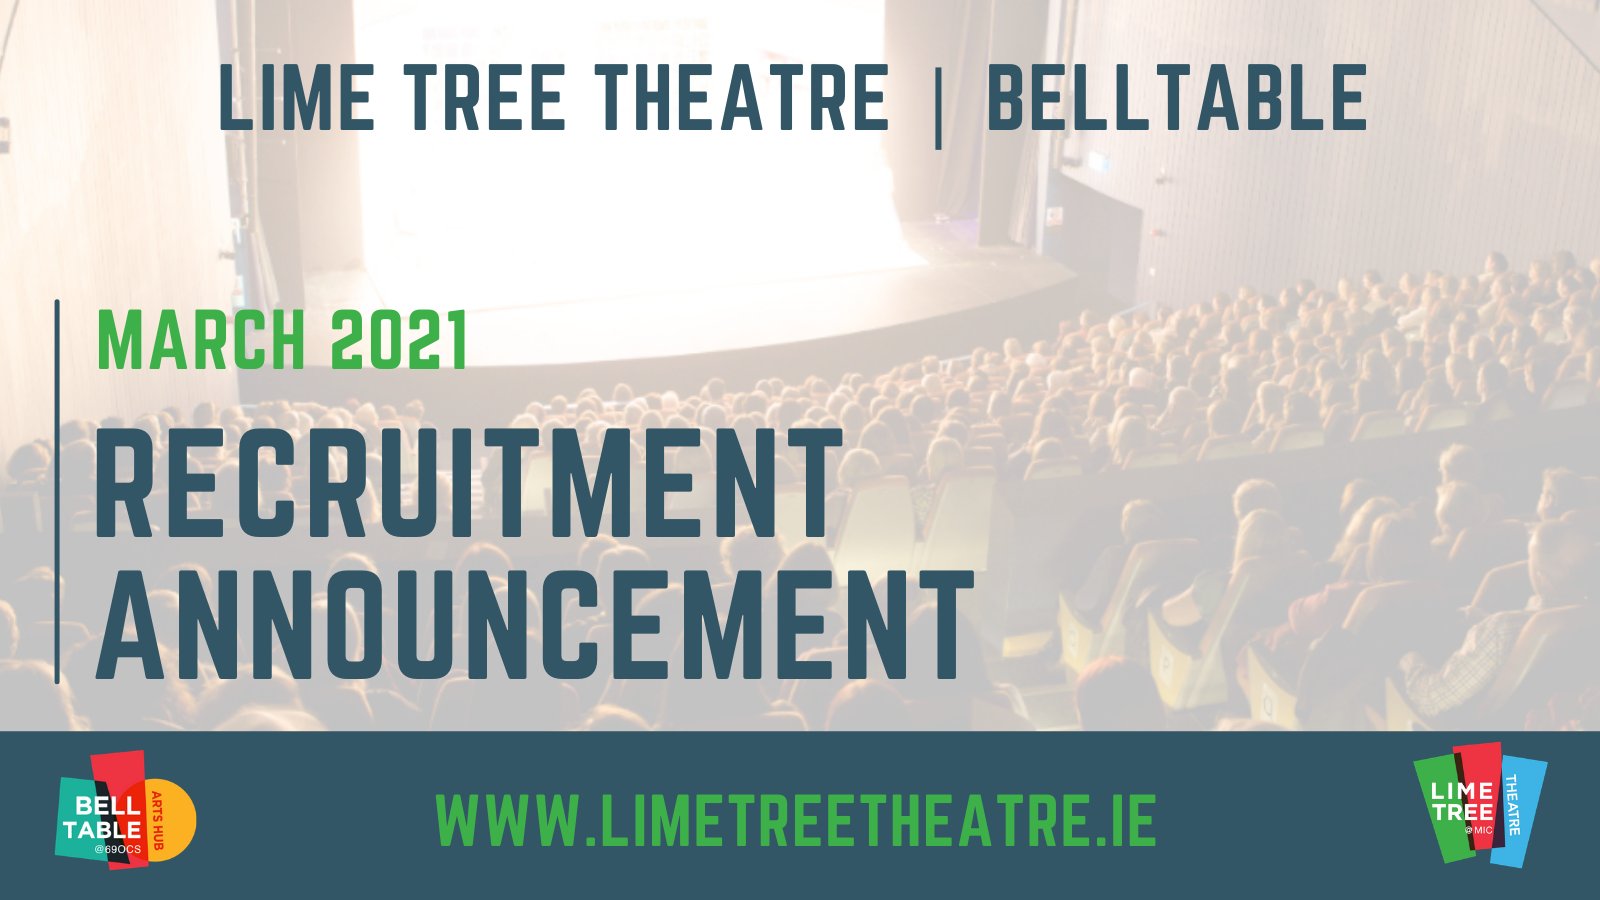 Belltable Recruitment Announcement - Lime Tree Theatre and Belltable are looking to recruit two new members of staff who will become part of a small, hardworking and dedicated team.